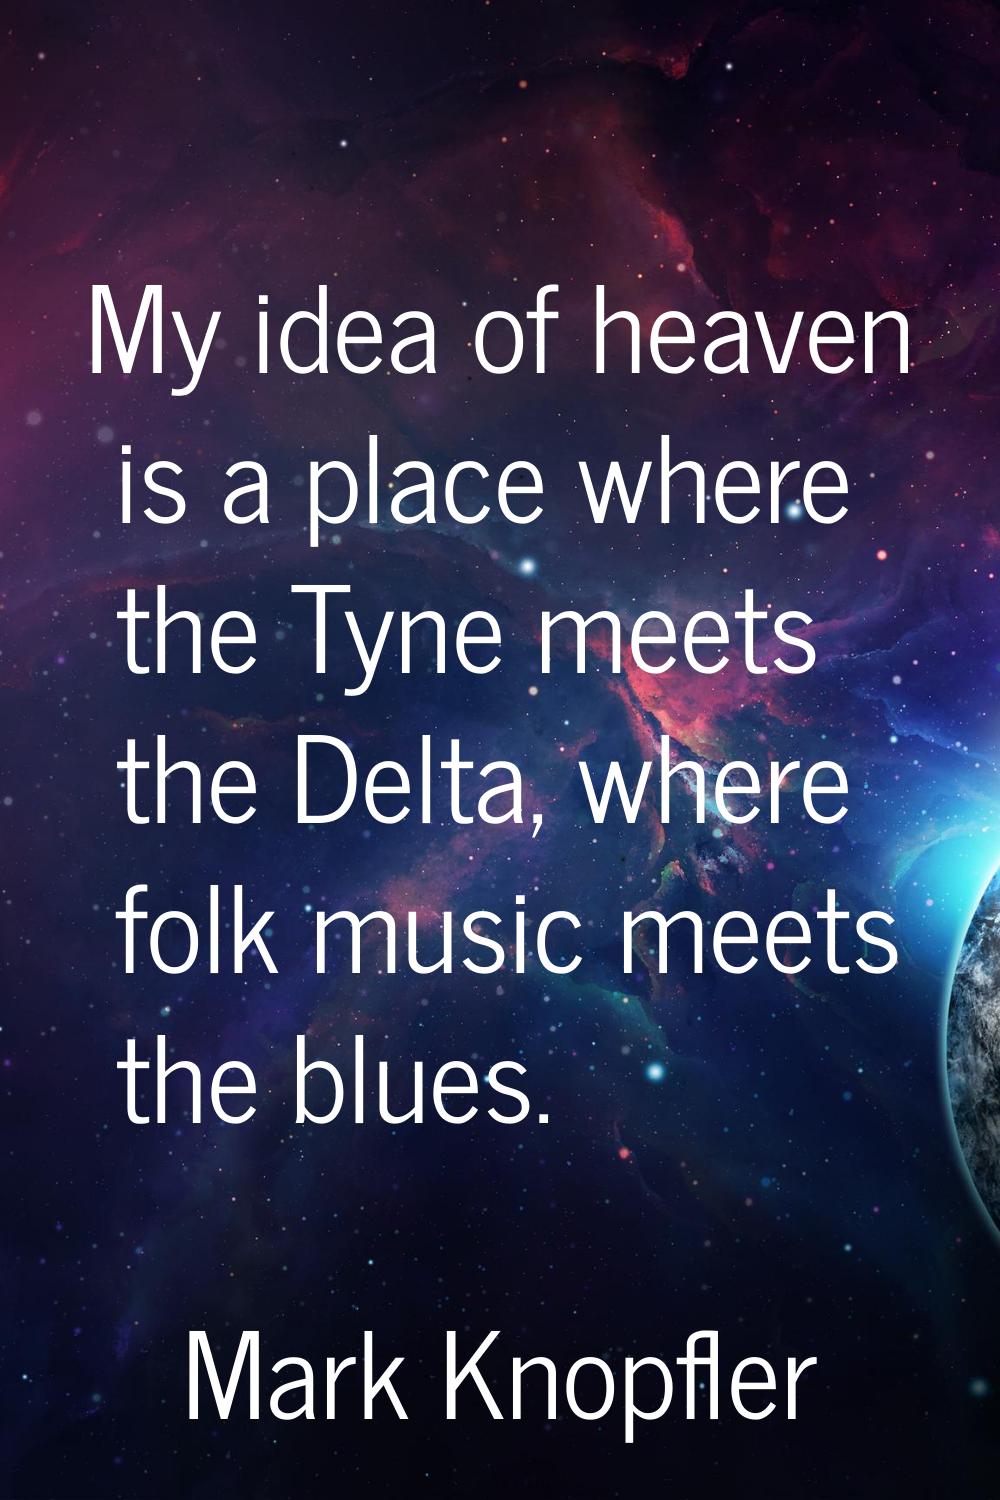 My idea of heaven is a place where the Tyne meets the Delta, where folk music meets the blues.